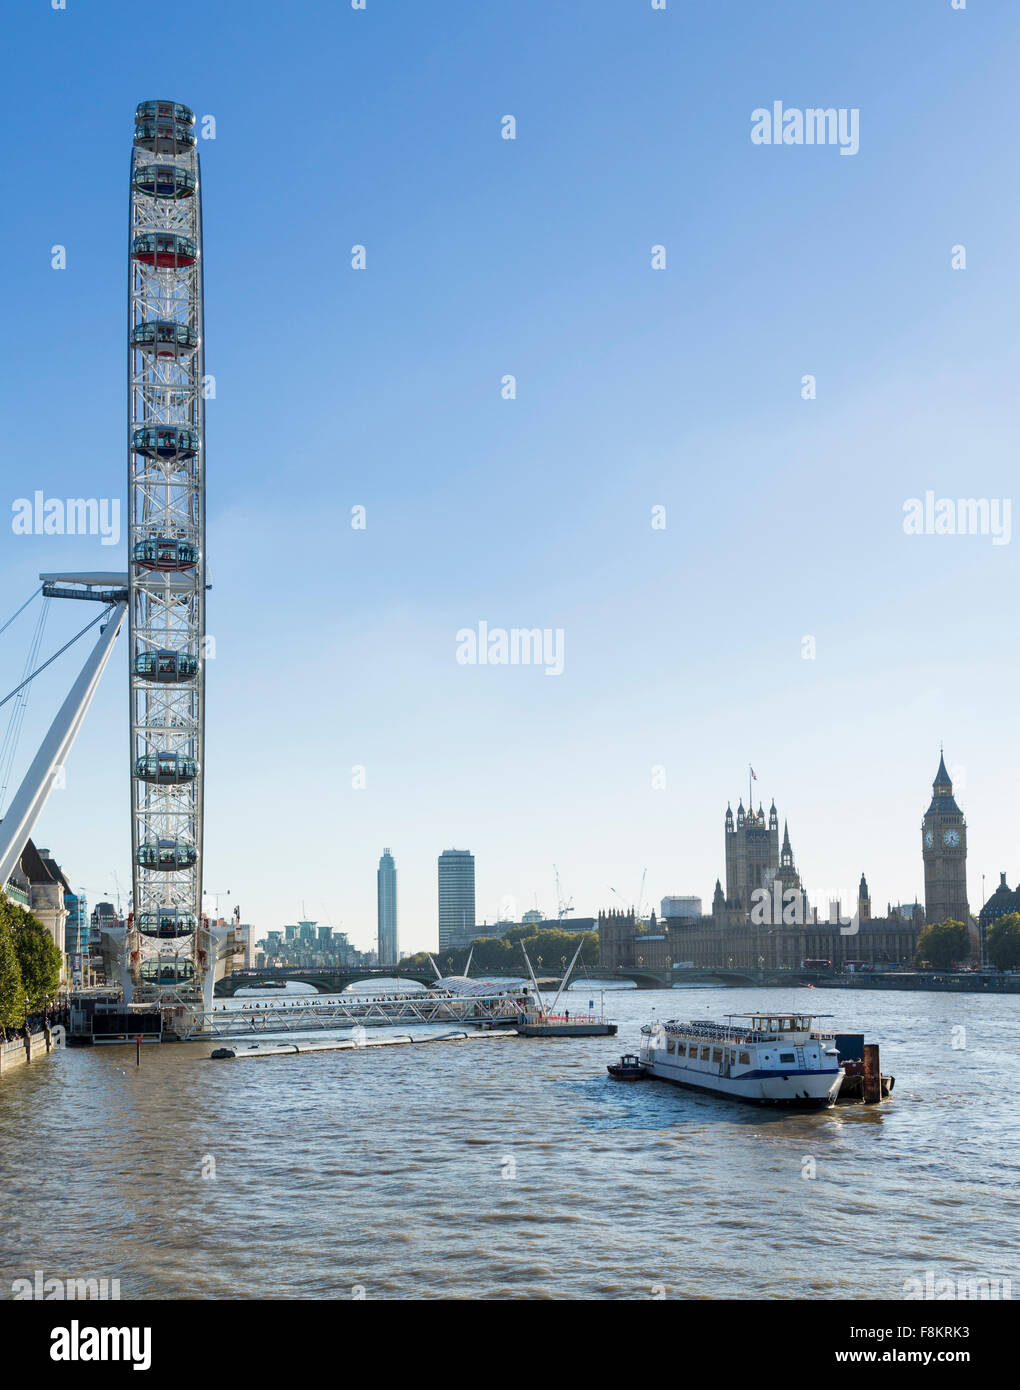 London Eye or Millennium Wheel on South Bank of River Thames in London England Stock Photo